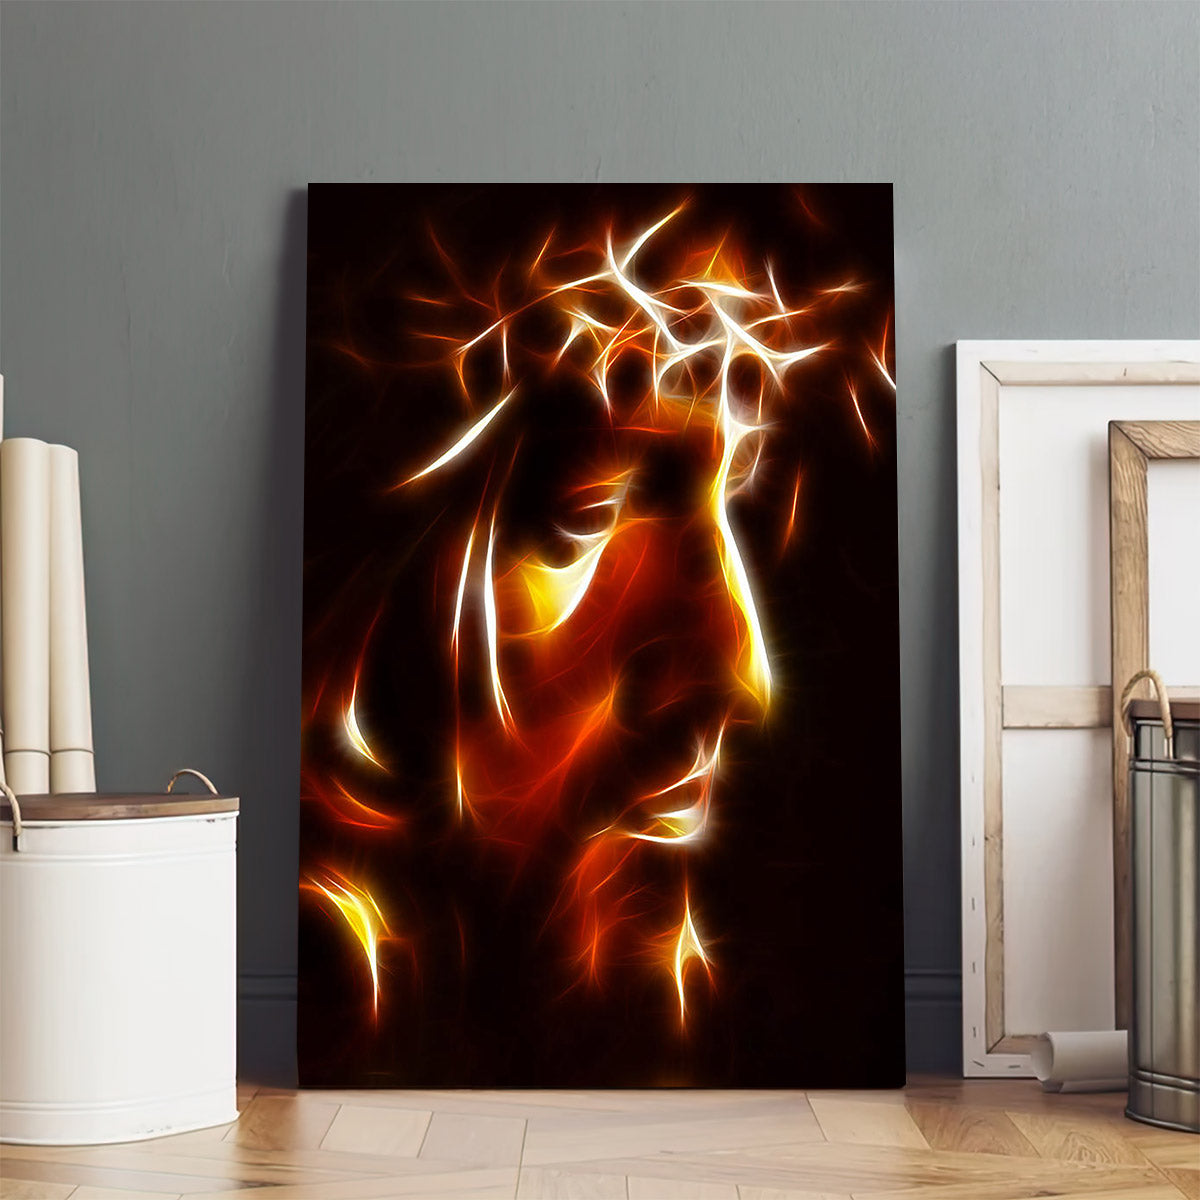 The Passion Of Christ Canvas Pictures - Christian Canvas Wall Decor - Religious Wall Art Canvas